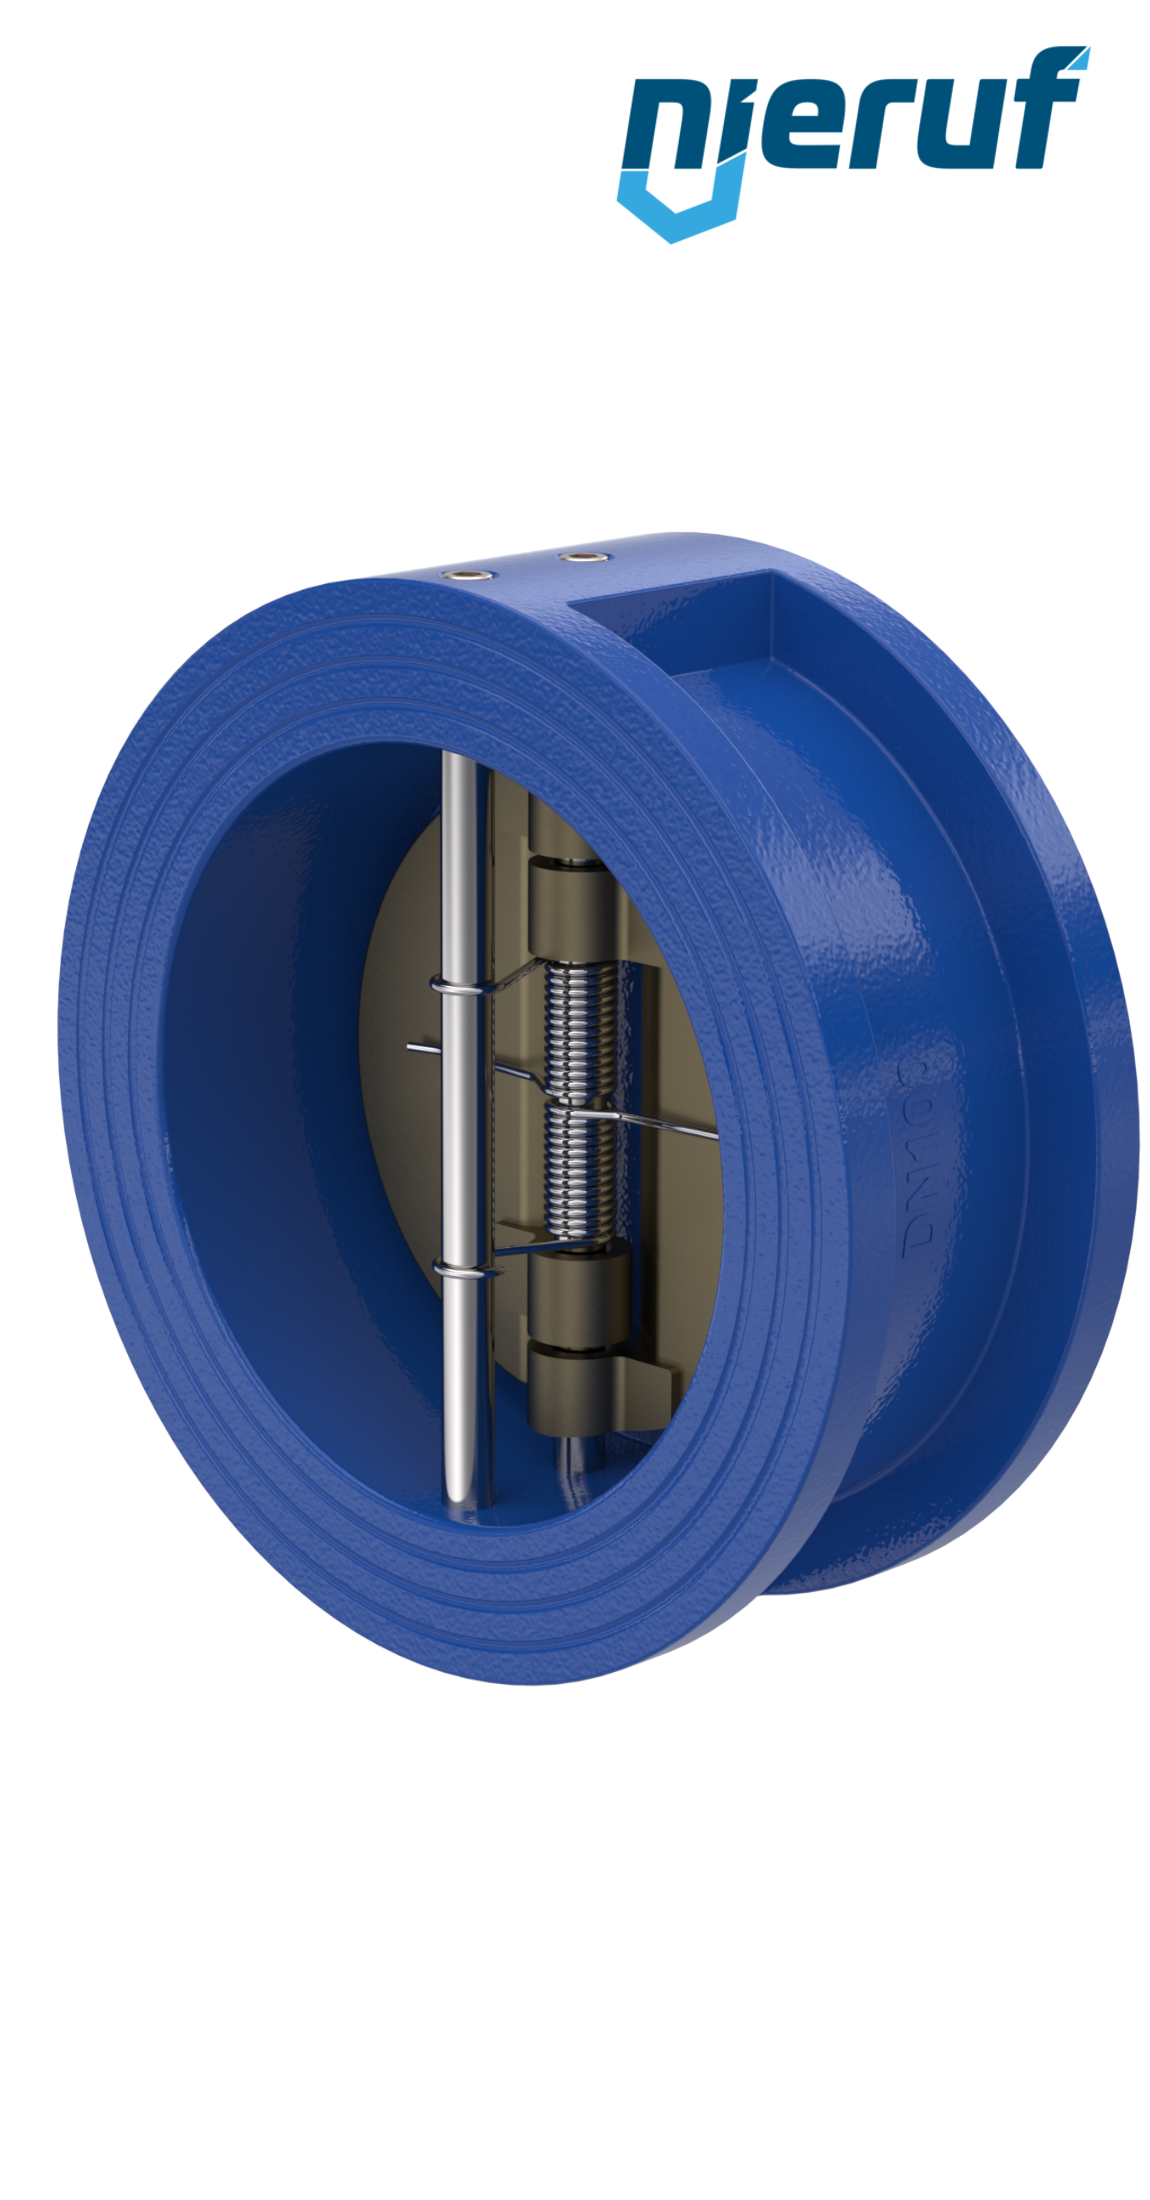 dual plate check valve DN100 DR04 GGG40 epoxyd plated blue 180µm EPDM